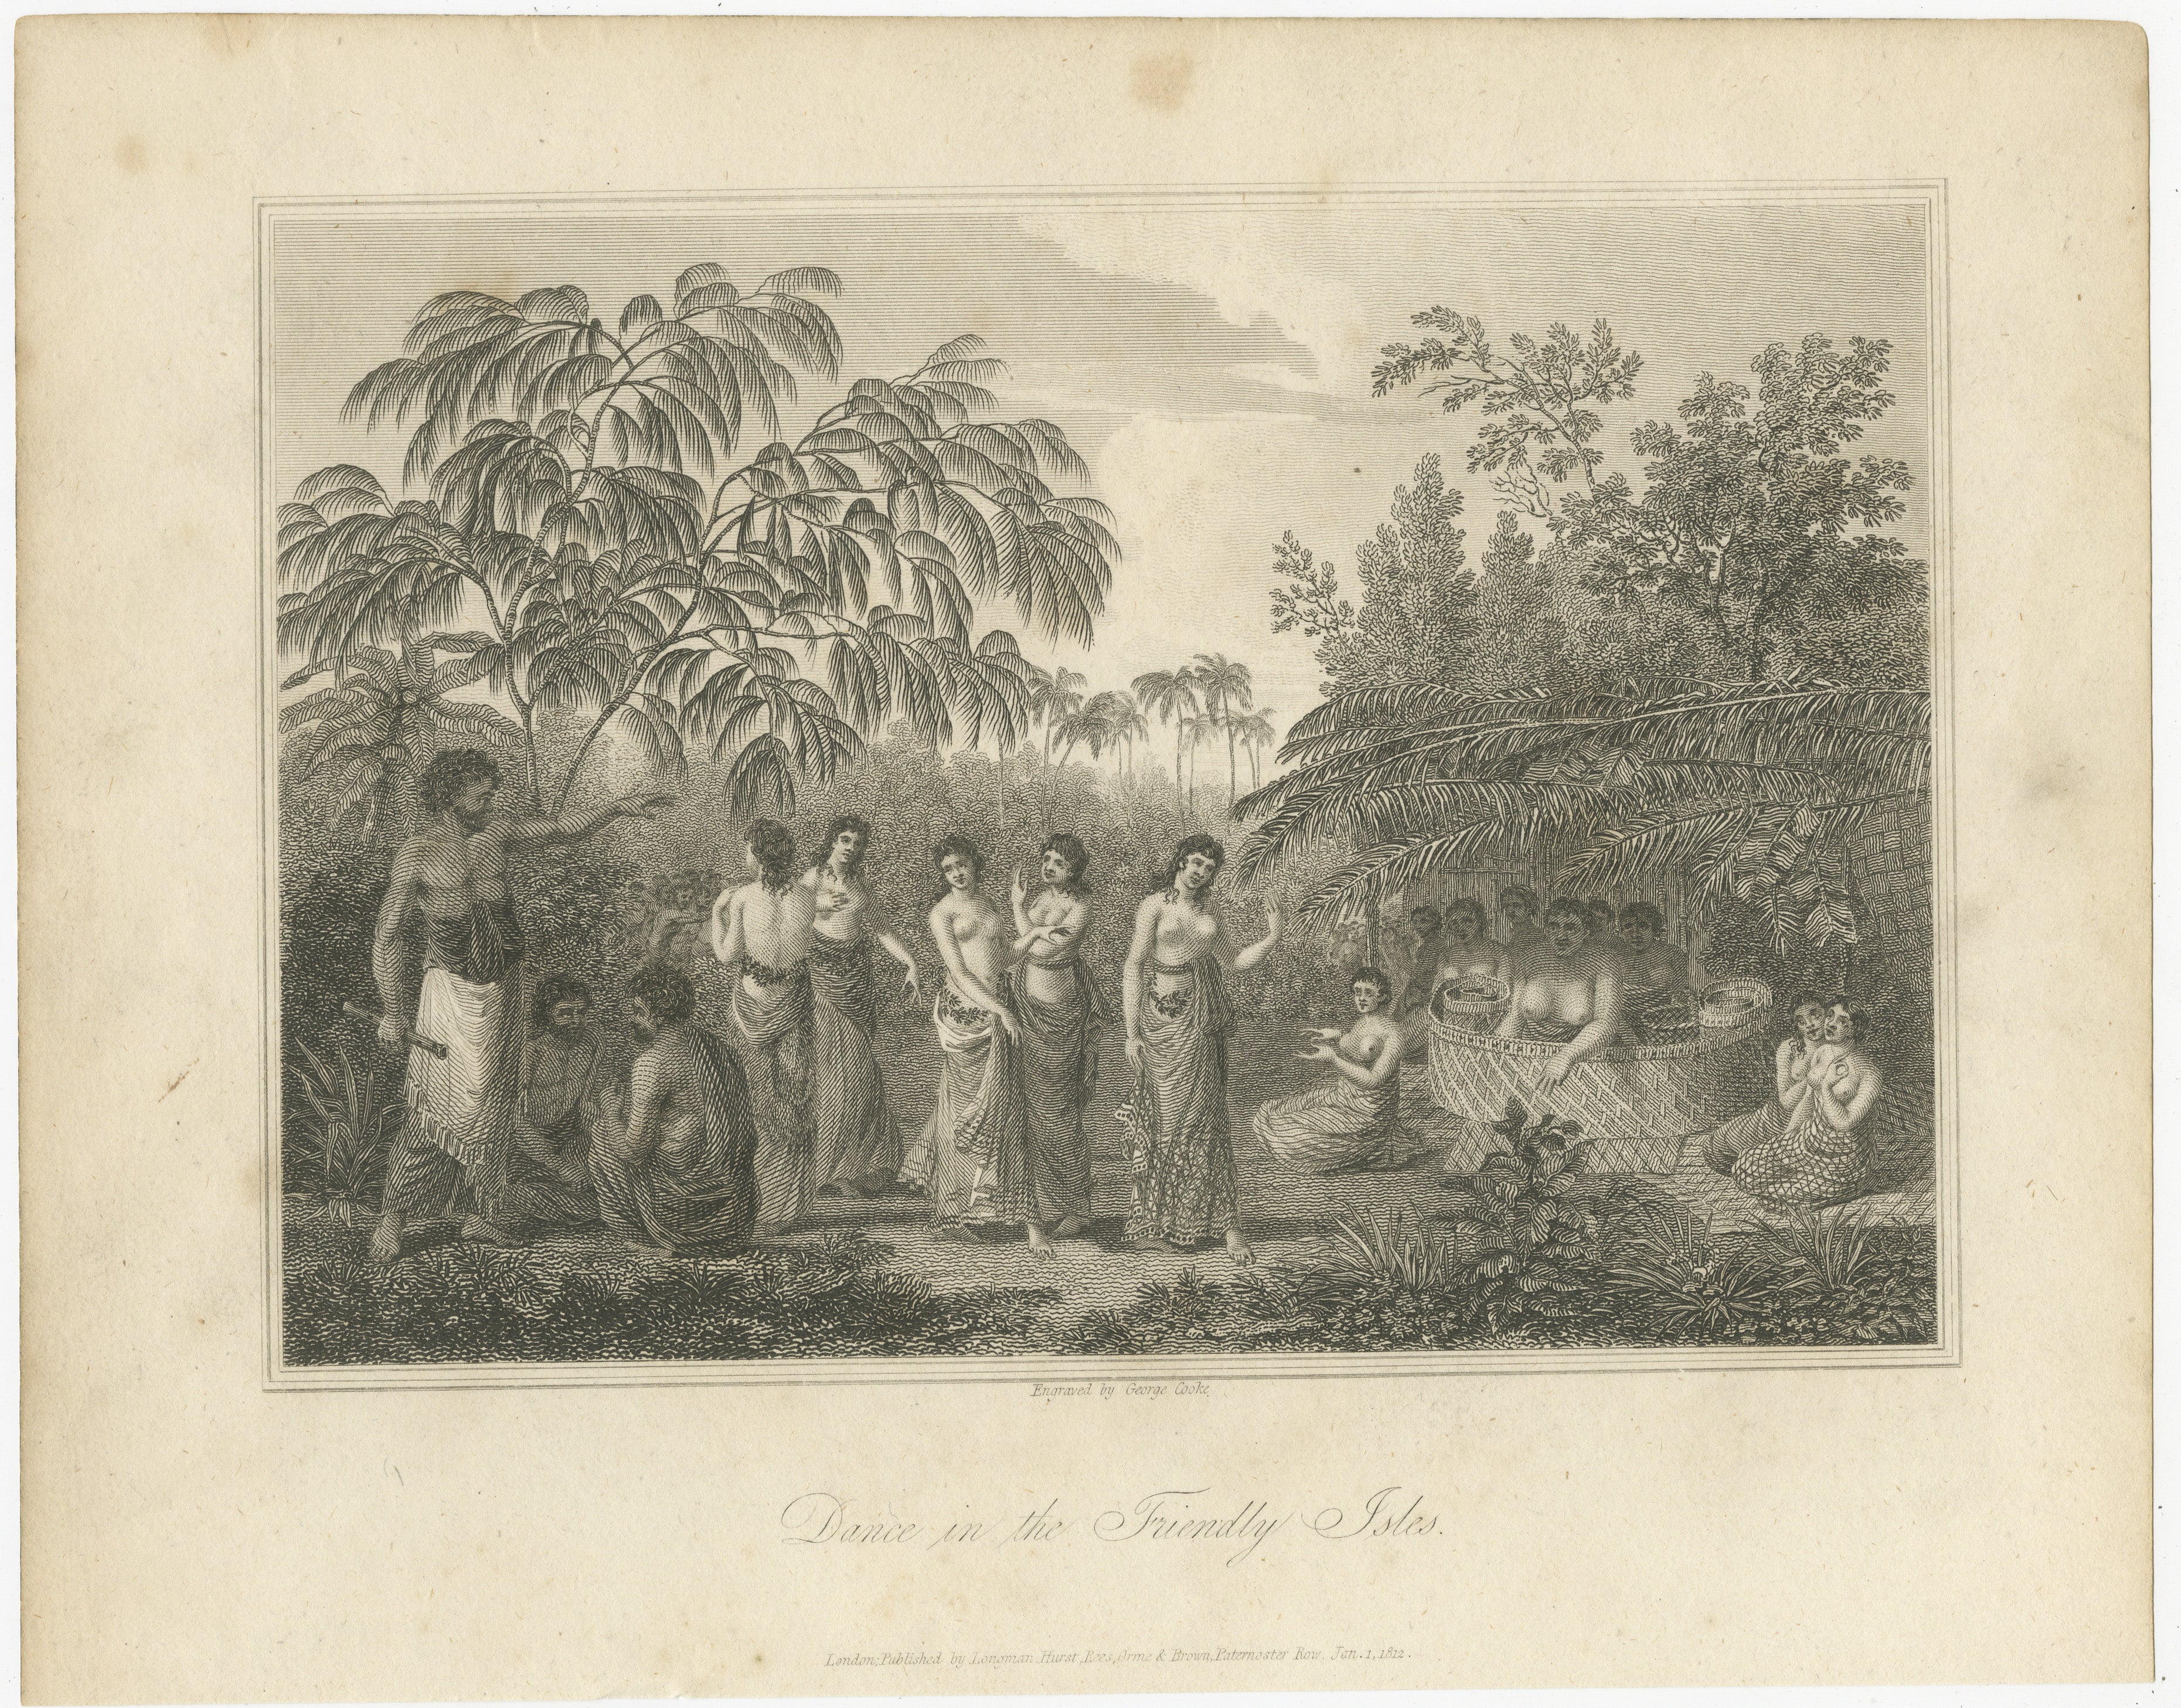 The engraving depicts a serene and communal scene labeled as 